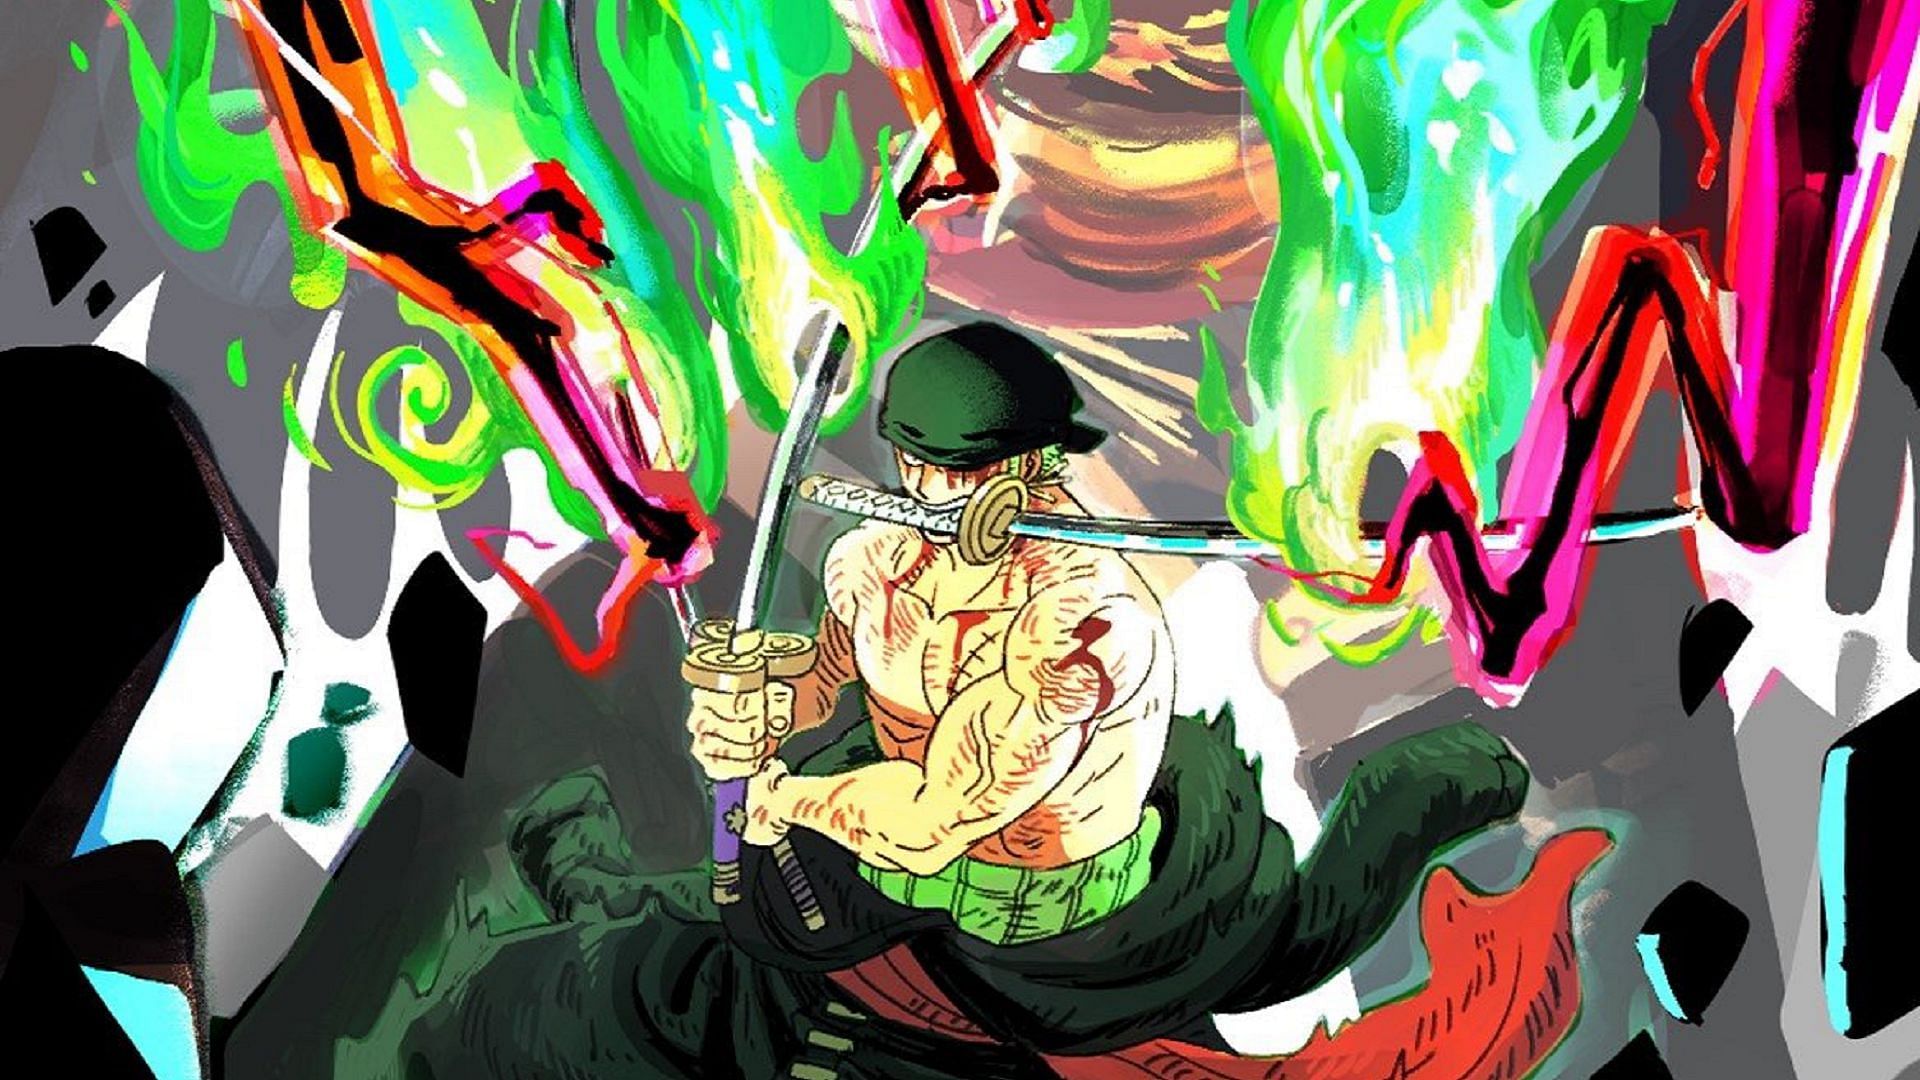 One Piece Episode 1062 Shows Zoro Defeating King And Fans Are Loving It! -  Anime Explained